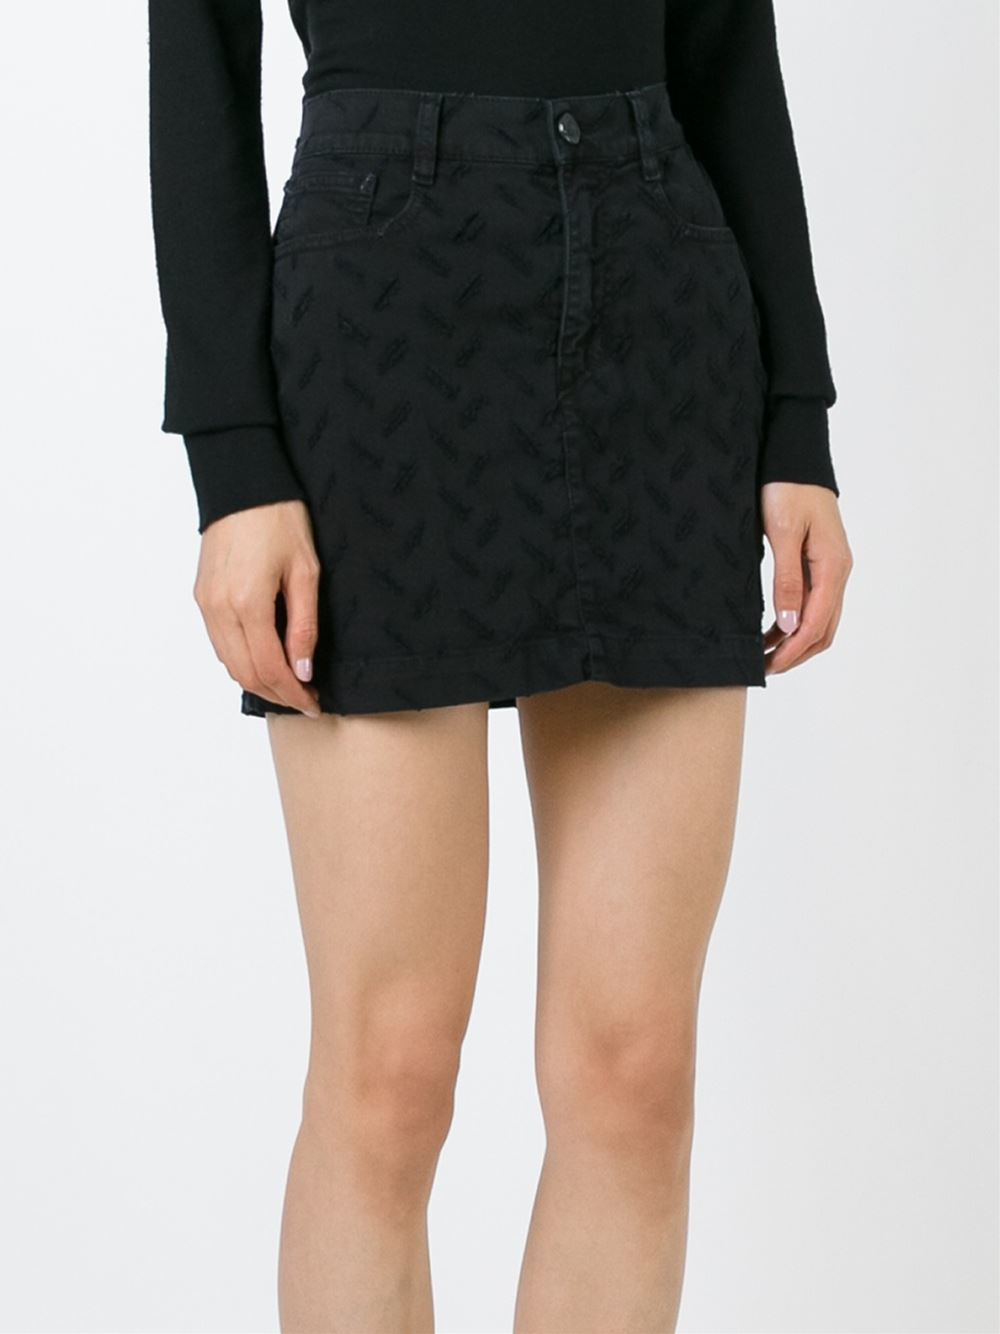 Vivienne westwood anglomania 'table' Mini Skirt in Black | Lyst